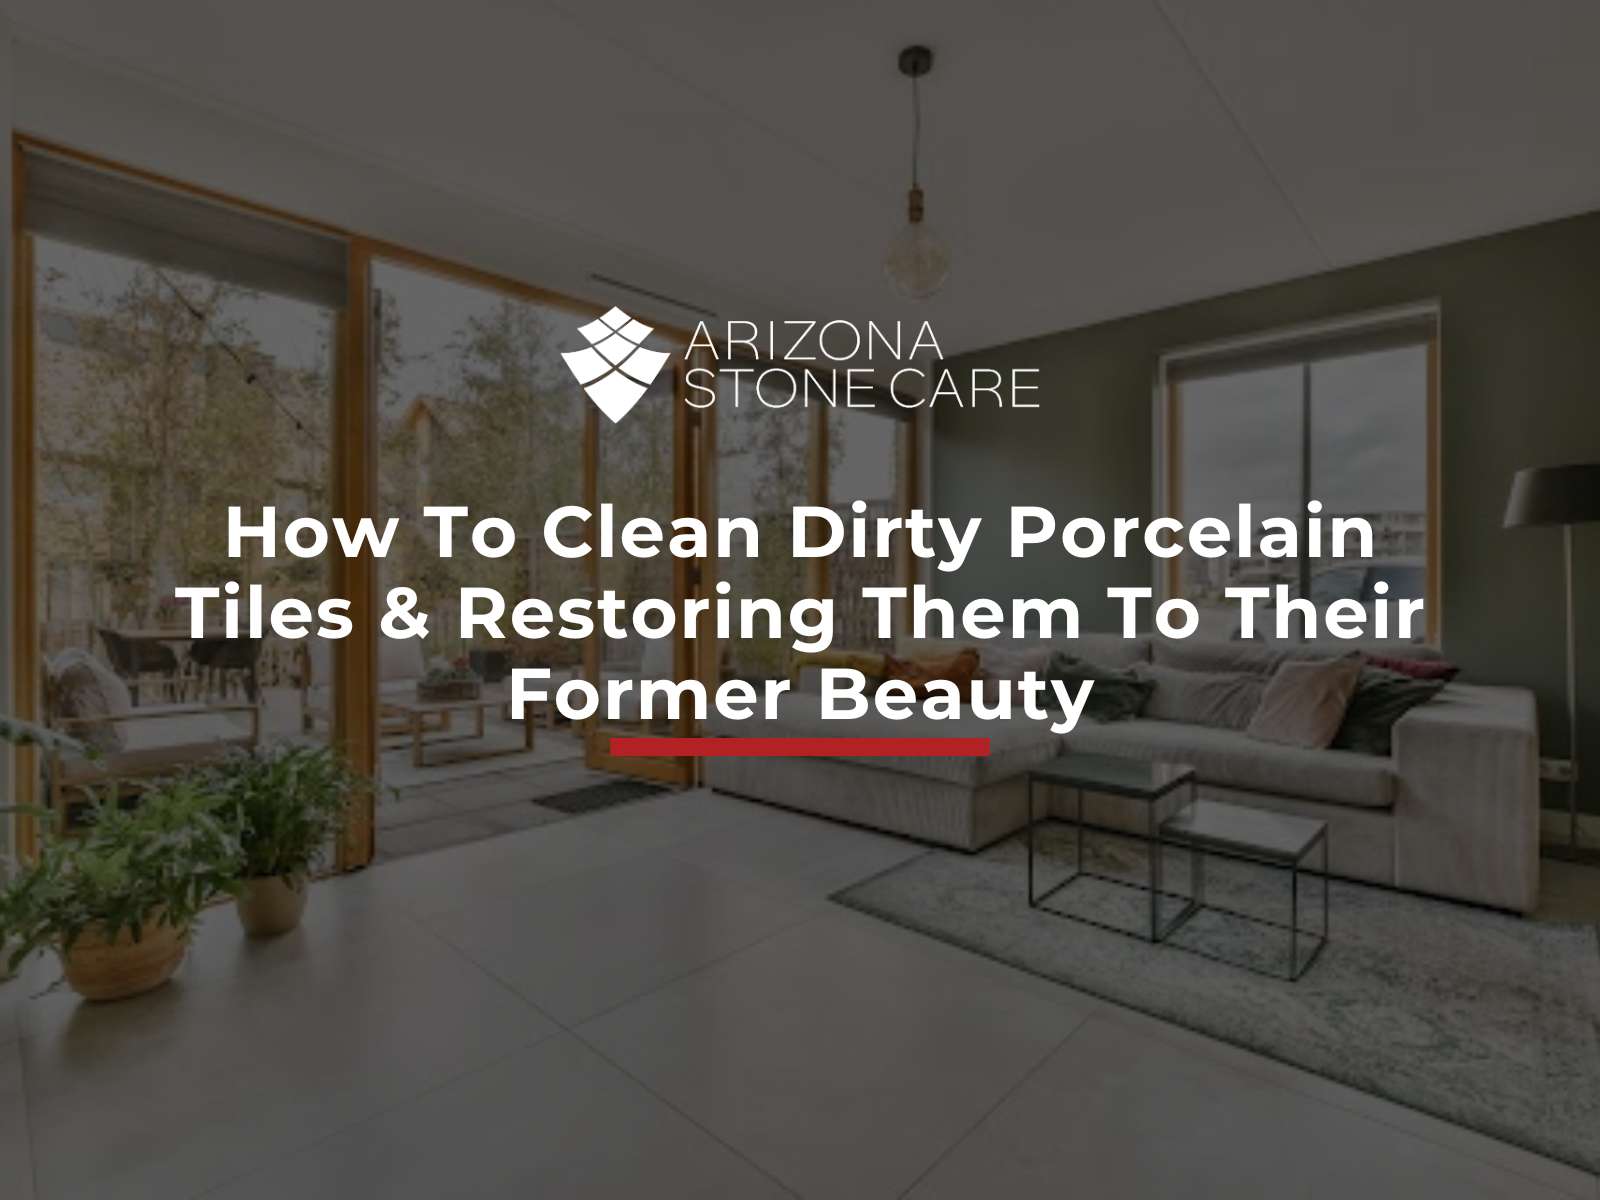 How To Clean Dirty Porcelain Tiles & Restoring Them To Their Former Beauty